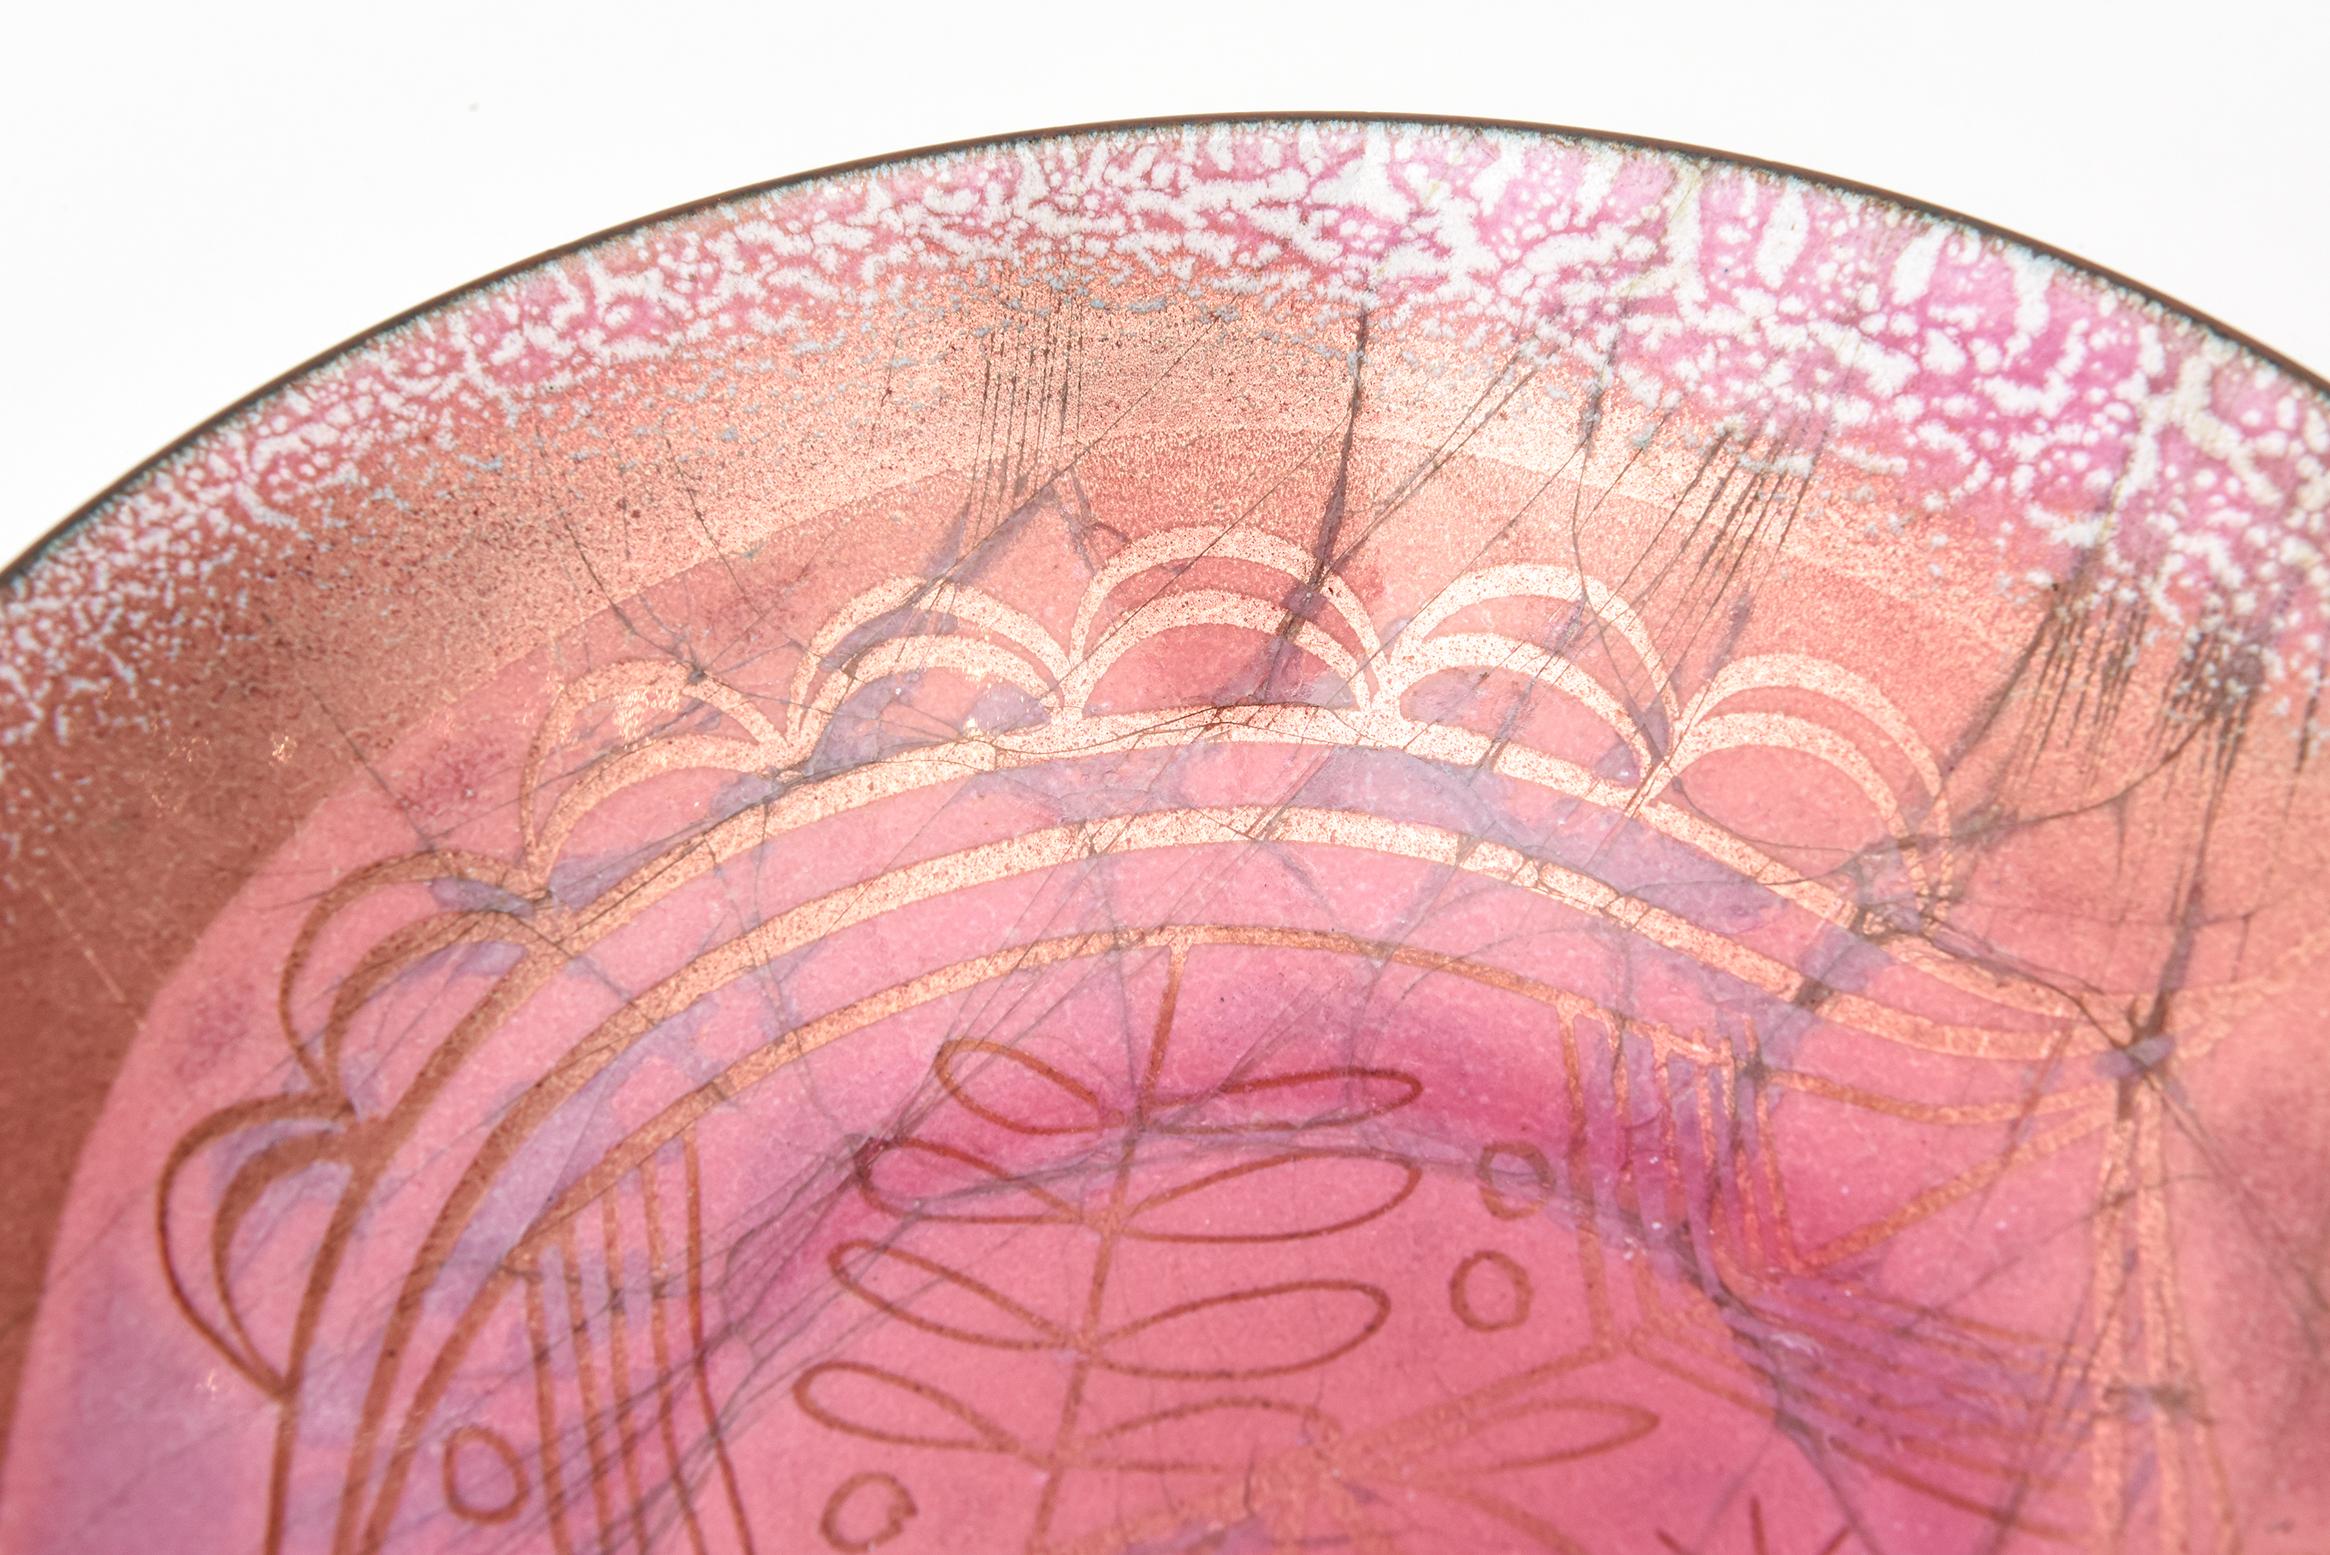 Mid-20th Century Edward Winter Signed PInk, Brown Enamel Bowl with Copper Mid-Century Modern 